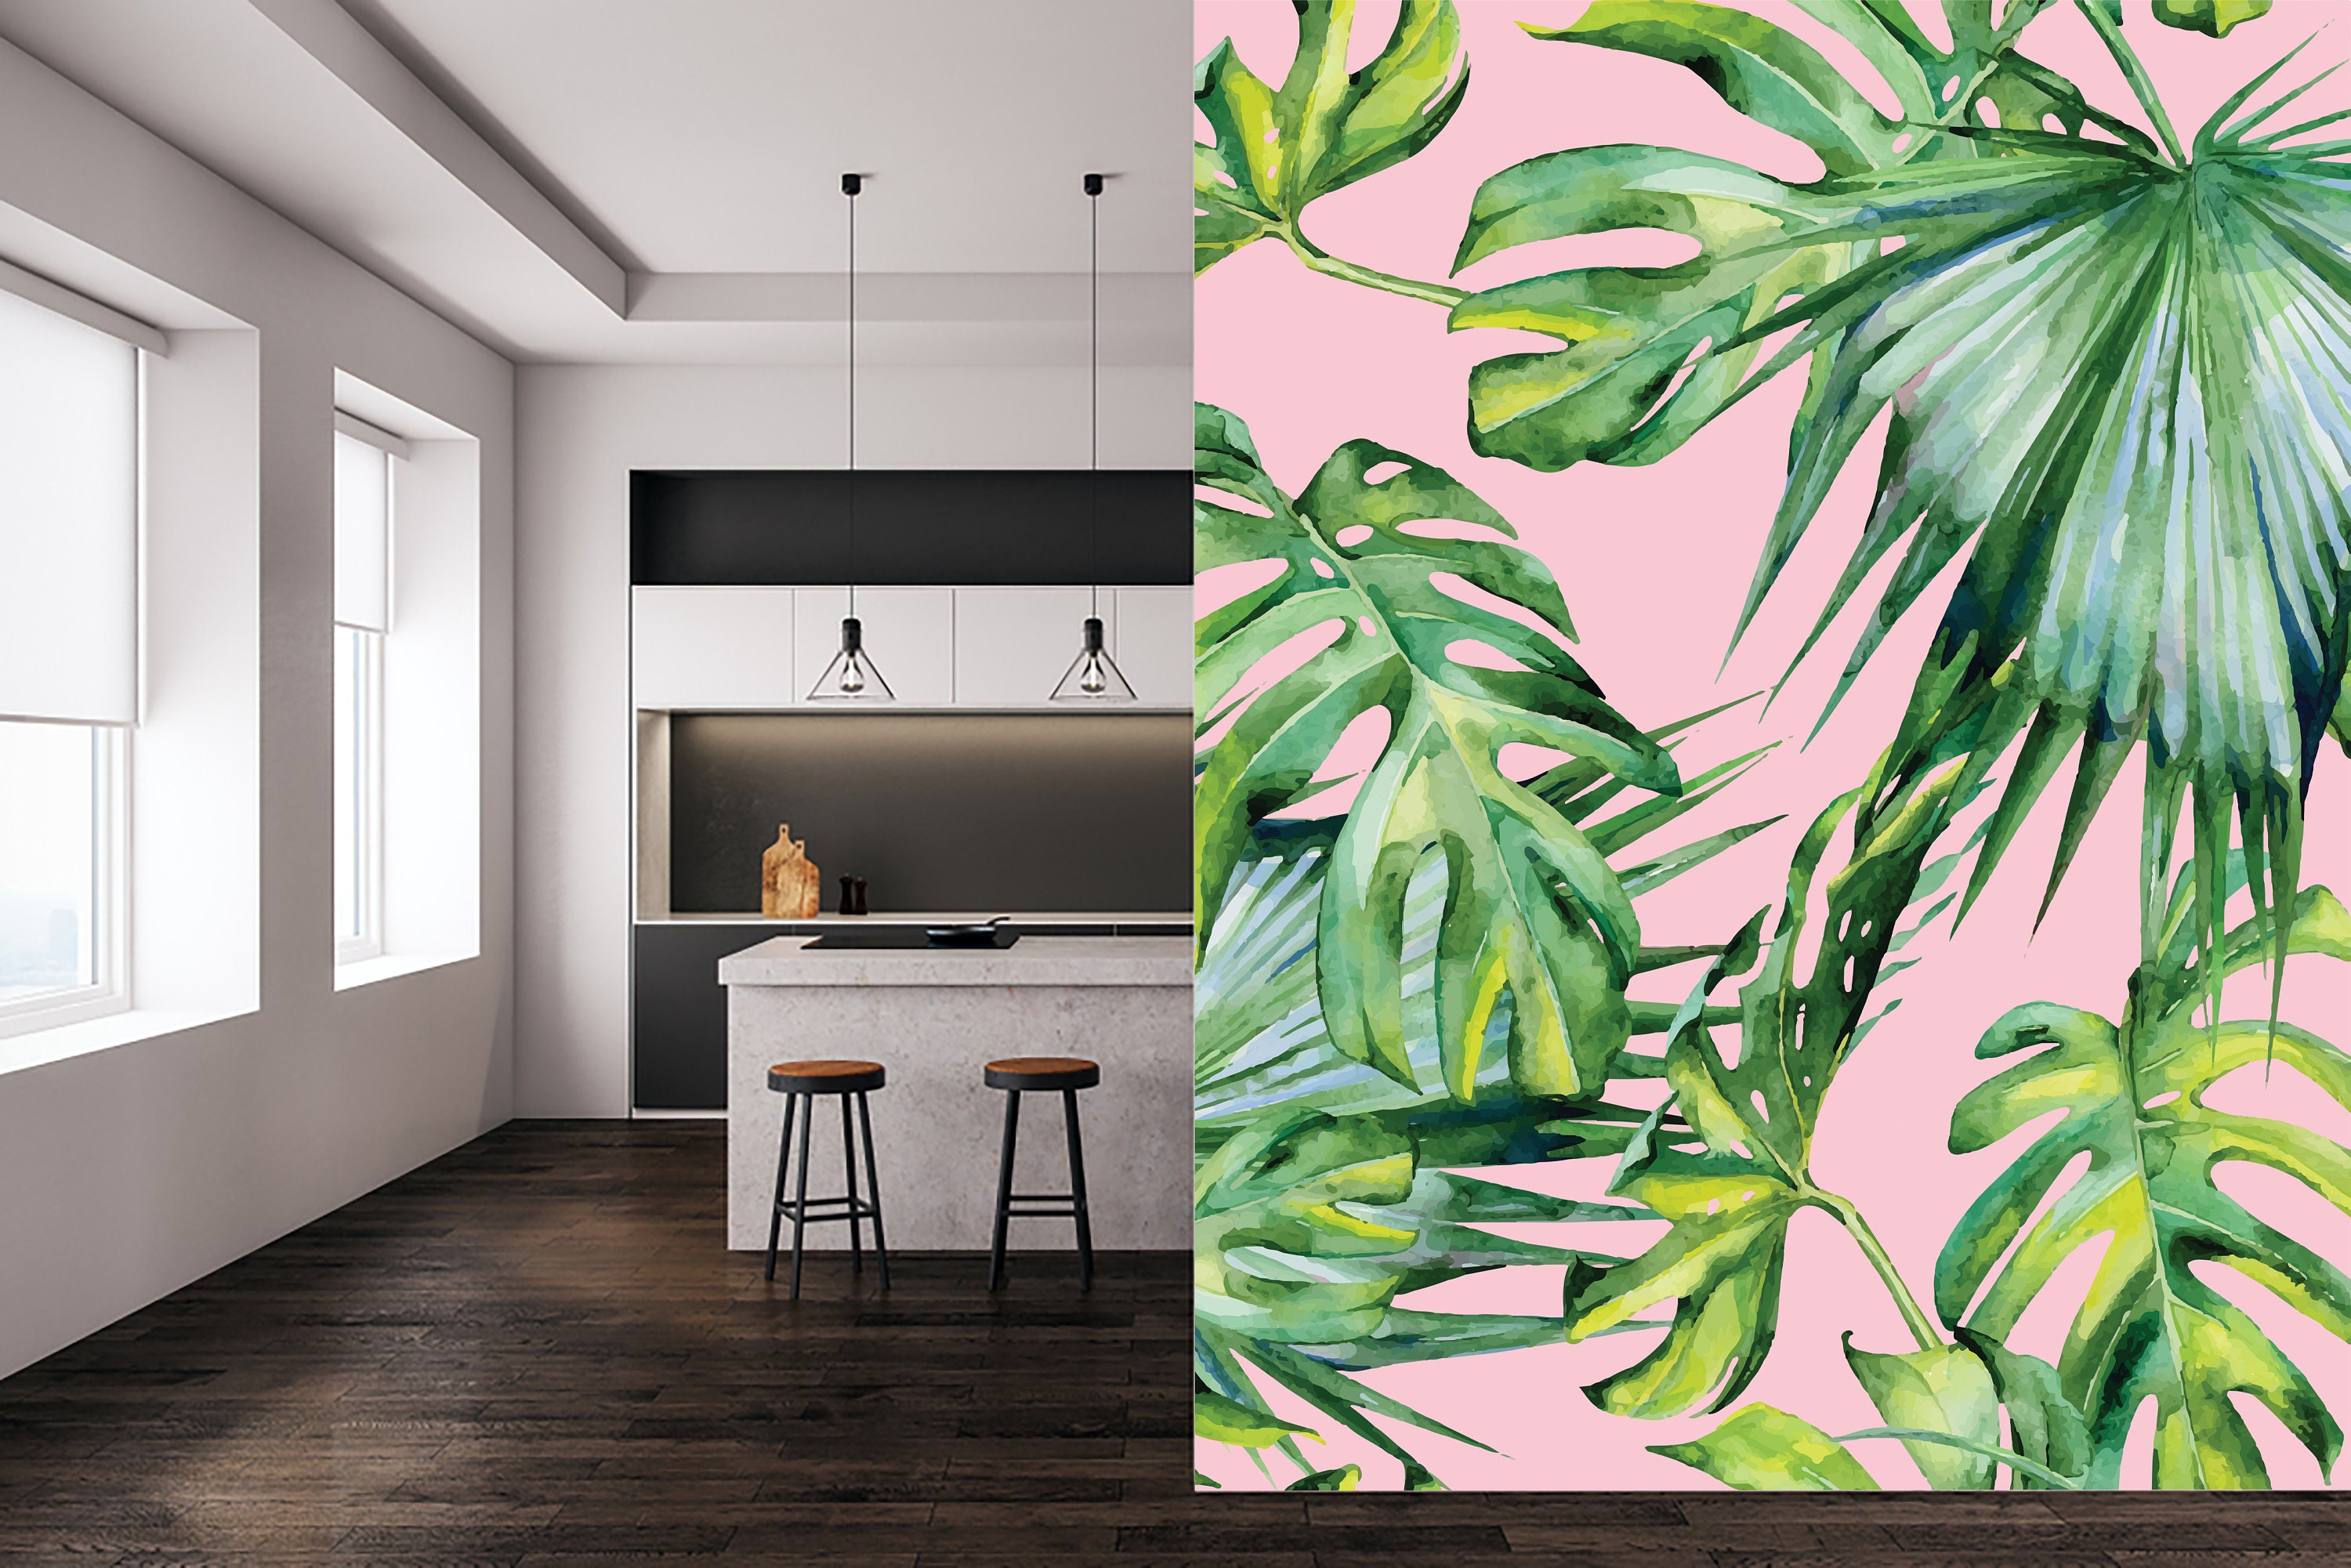 Rainforest Jungle Tropical Wallpaper. Peel and Stick Wall Mural. Green  Flowers and Palm Tree Leaves Design. Bathroom, Bedroom Decor. #6357 (Small